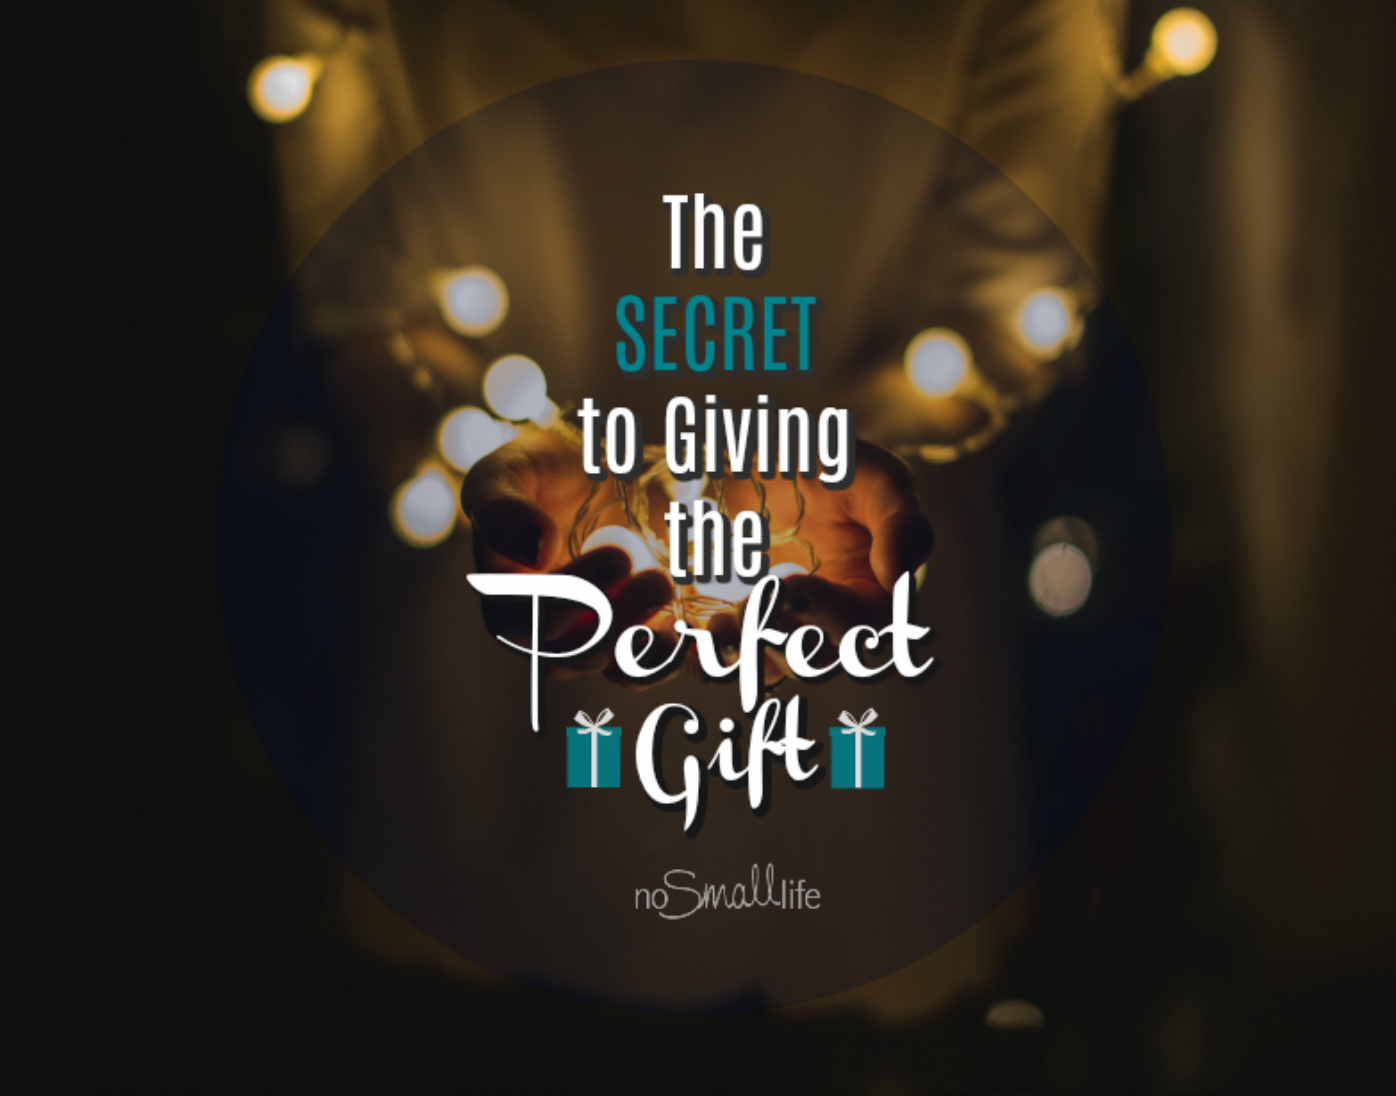 The Secret to Giving the Perfect Gift